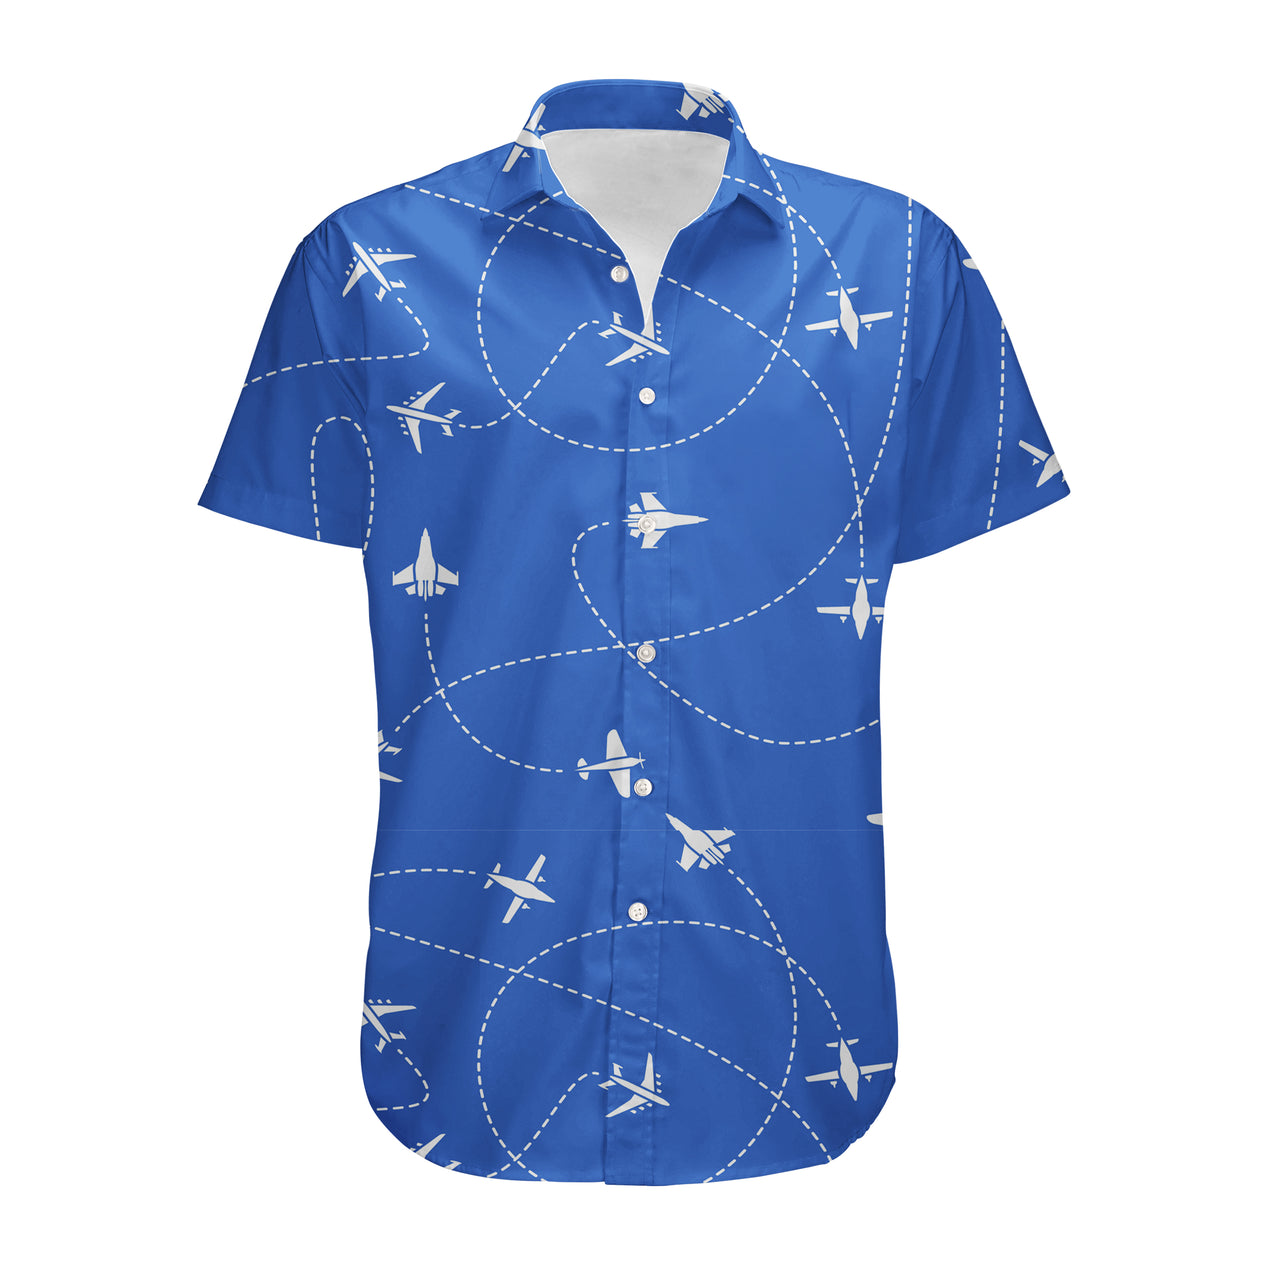 Travel The World By Plane (Blue) Designed 3D Shirts